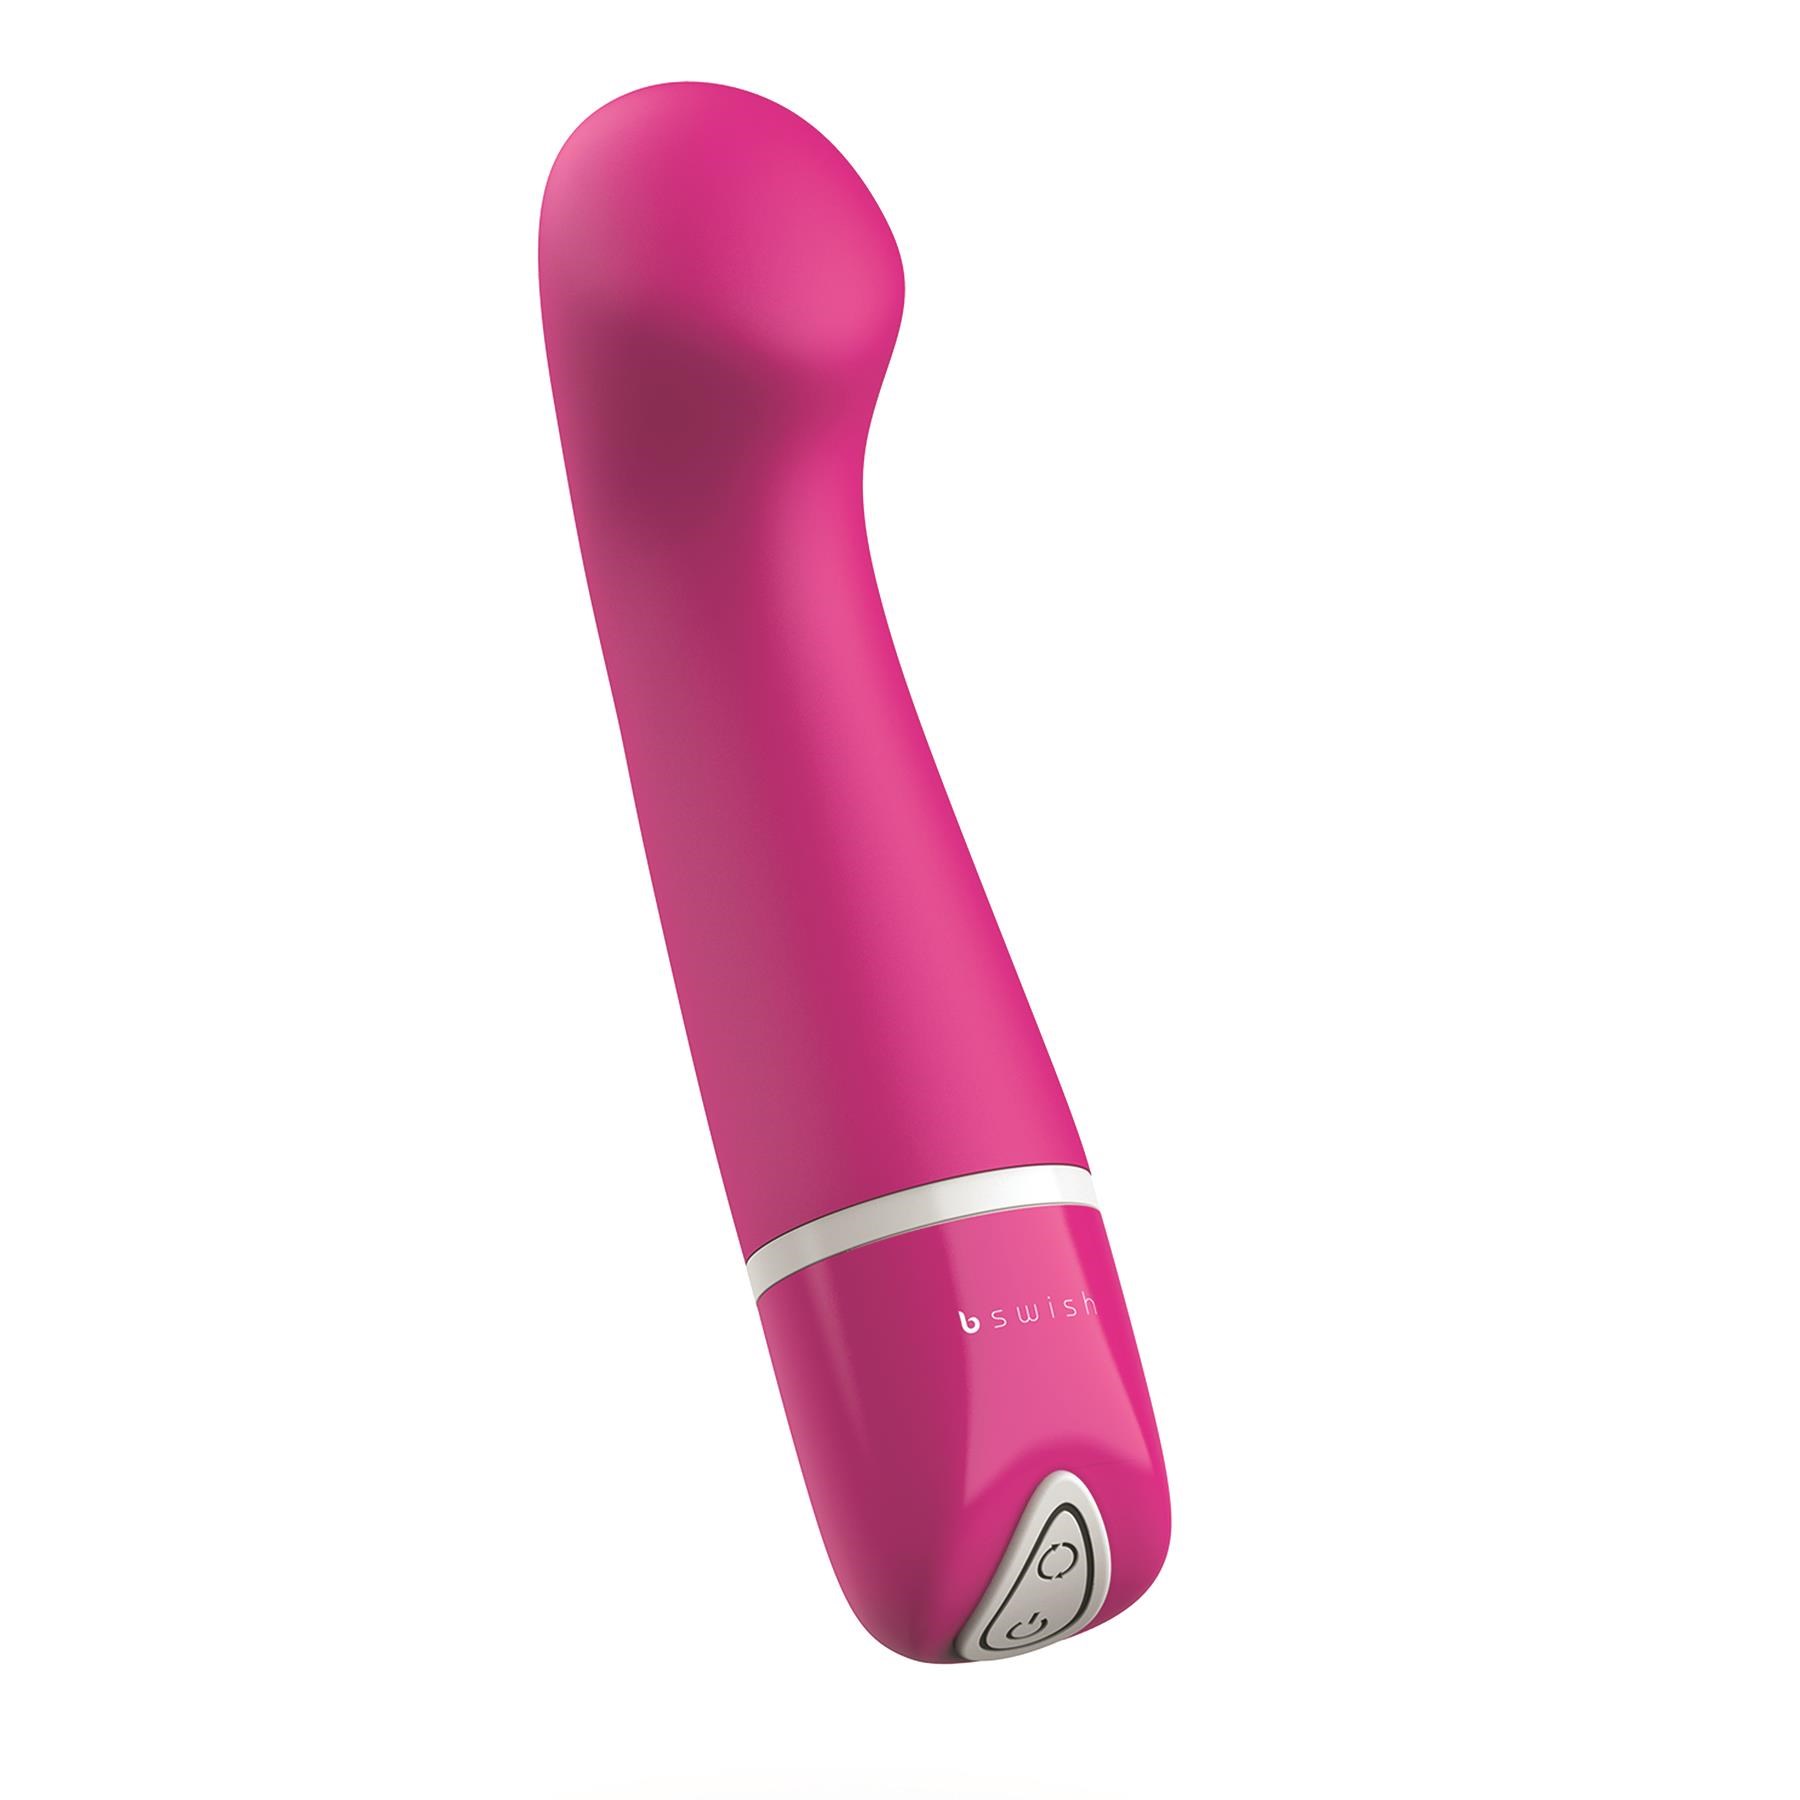 BSwish BDesired Deluxe Curve Mini Massager - Product Shot #2